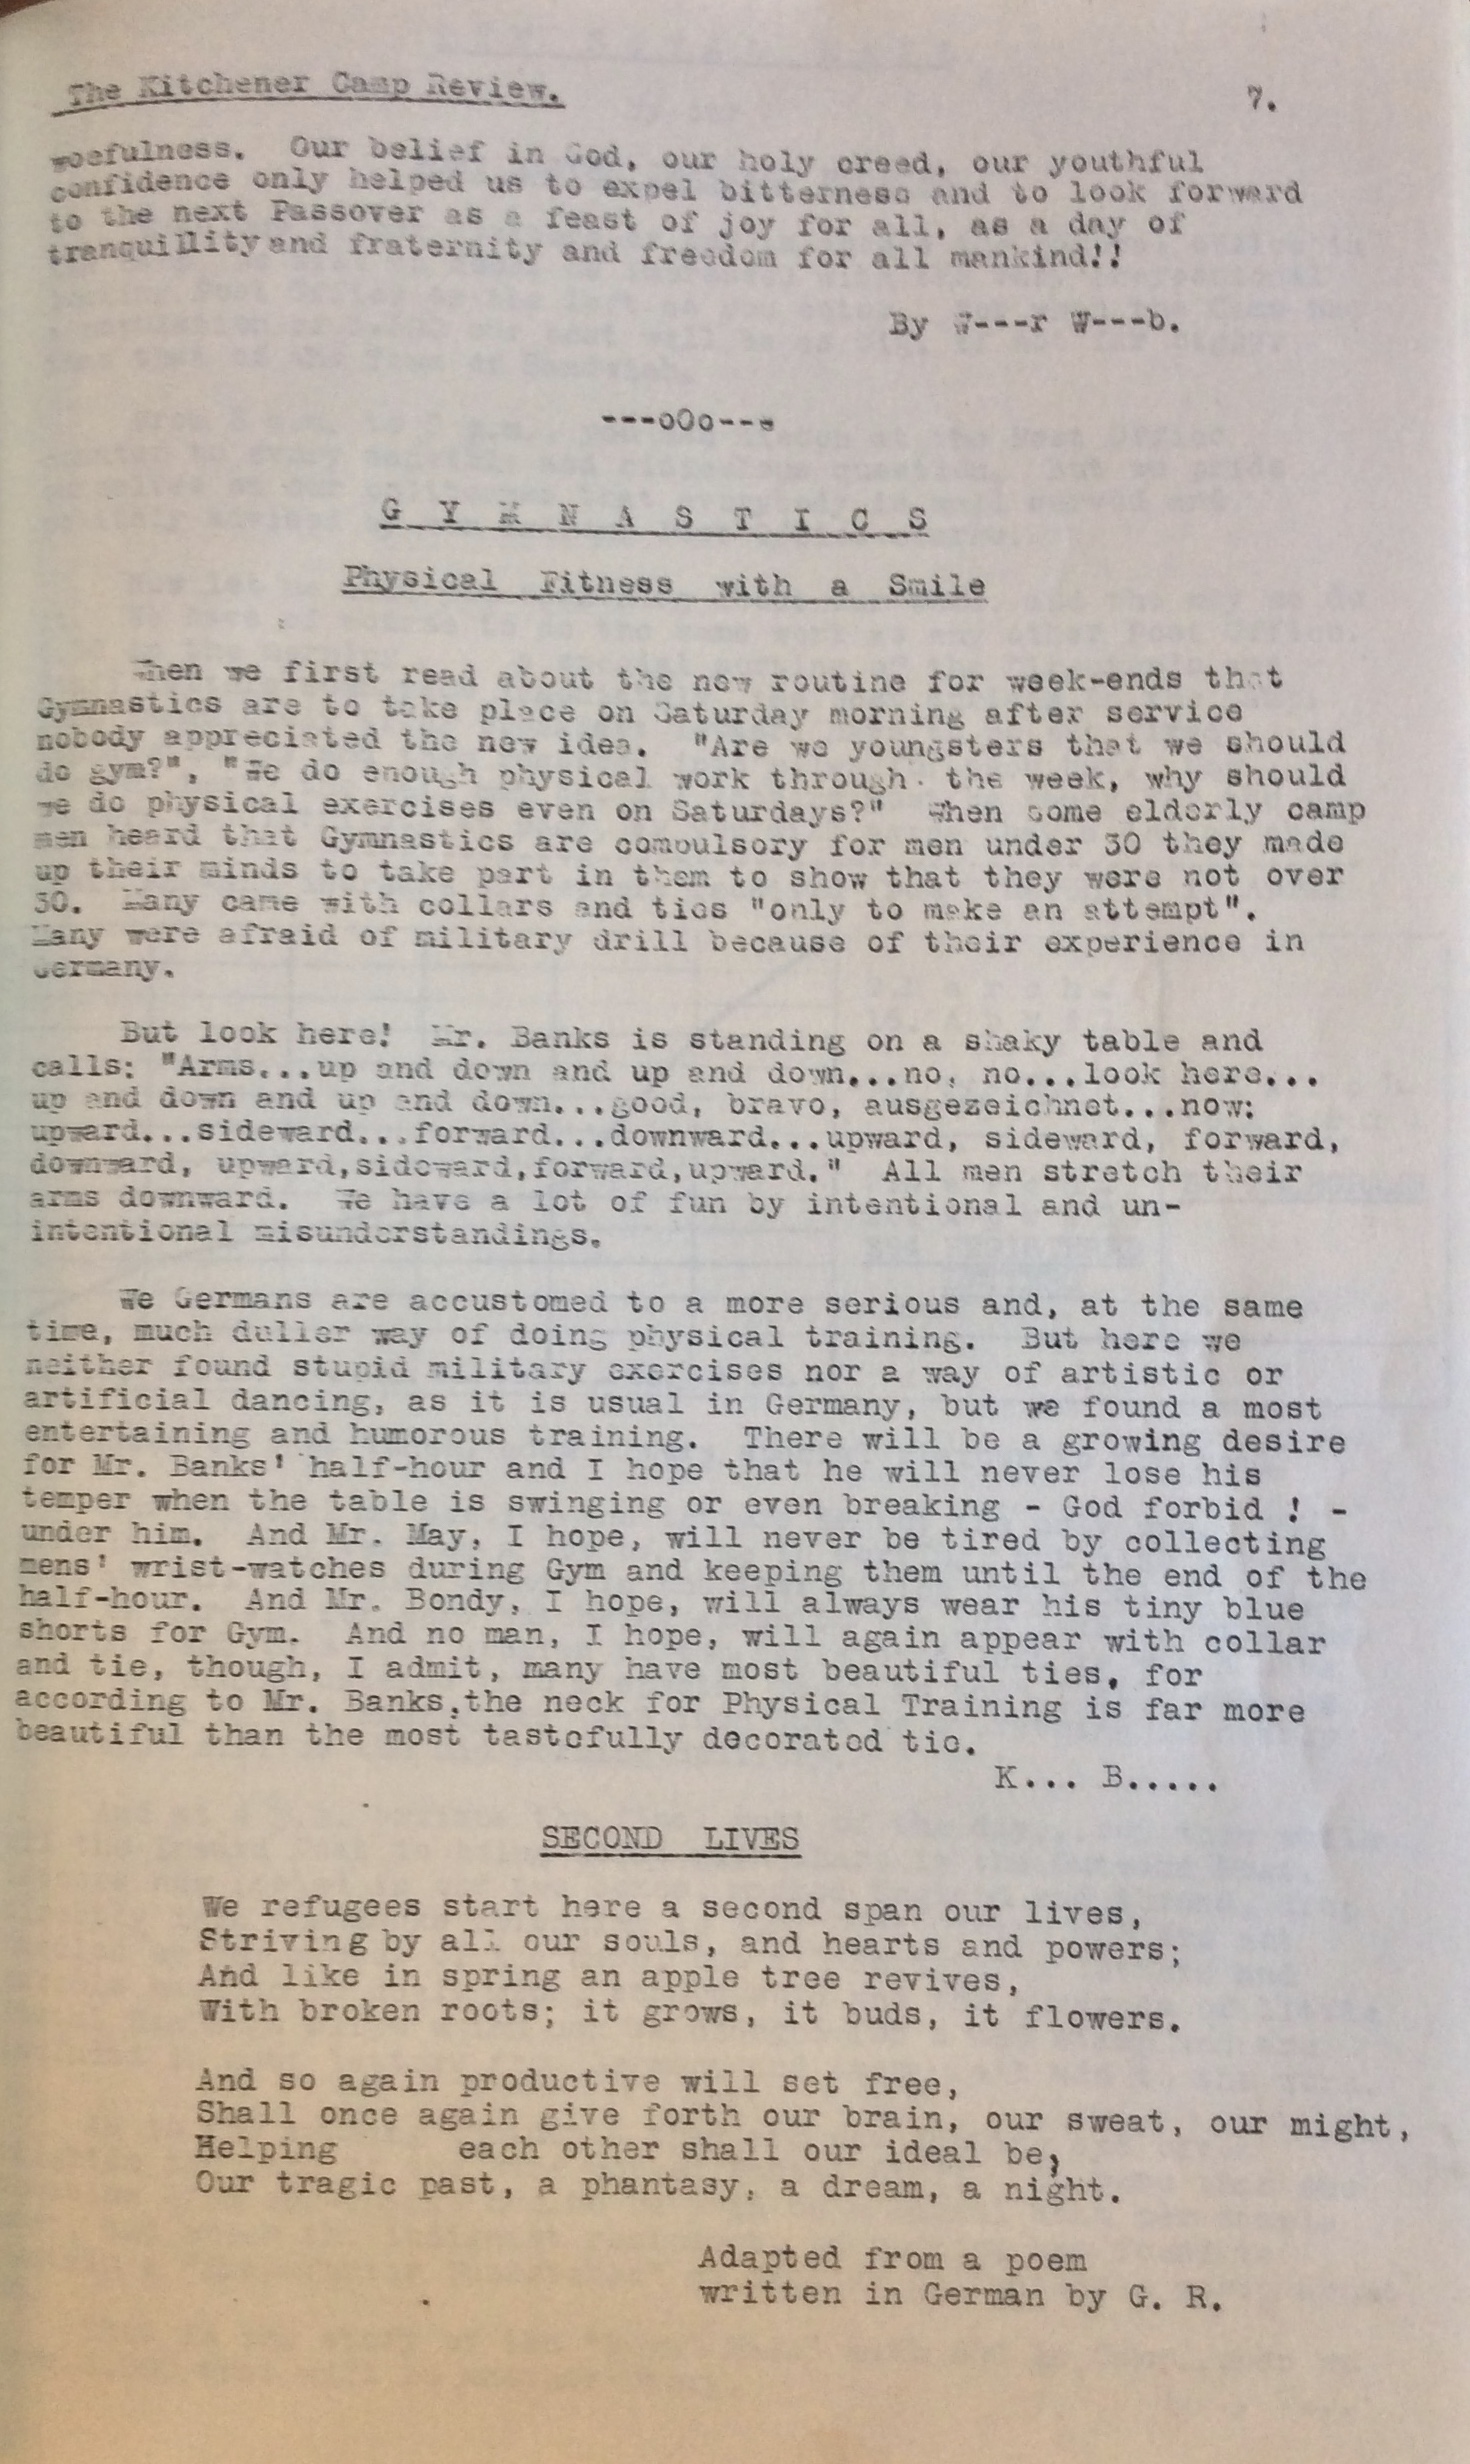 Kitchener Camp Review, May 1939, page 7